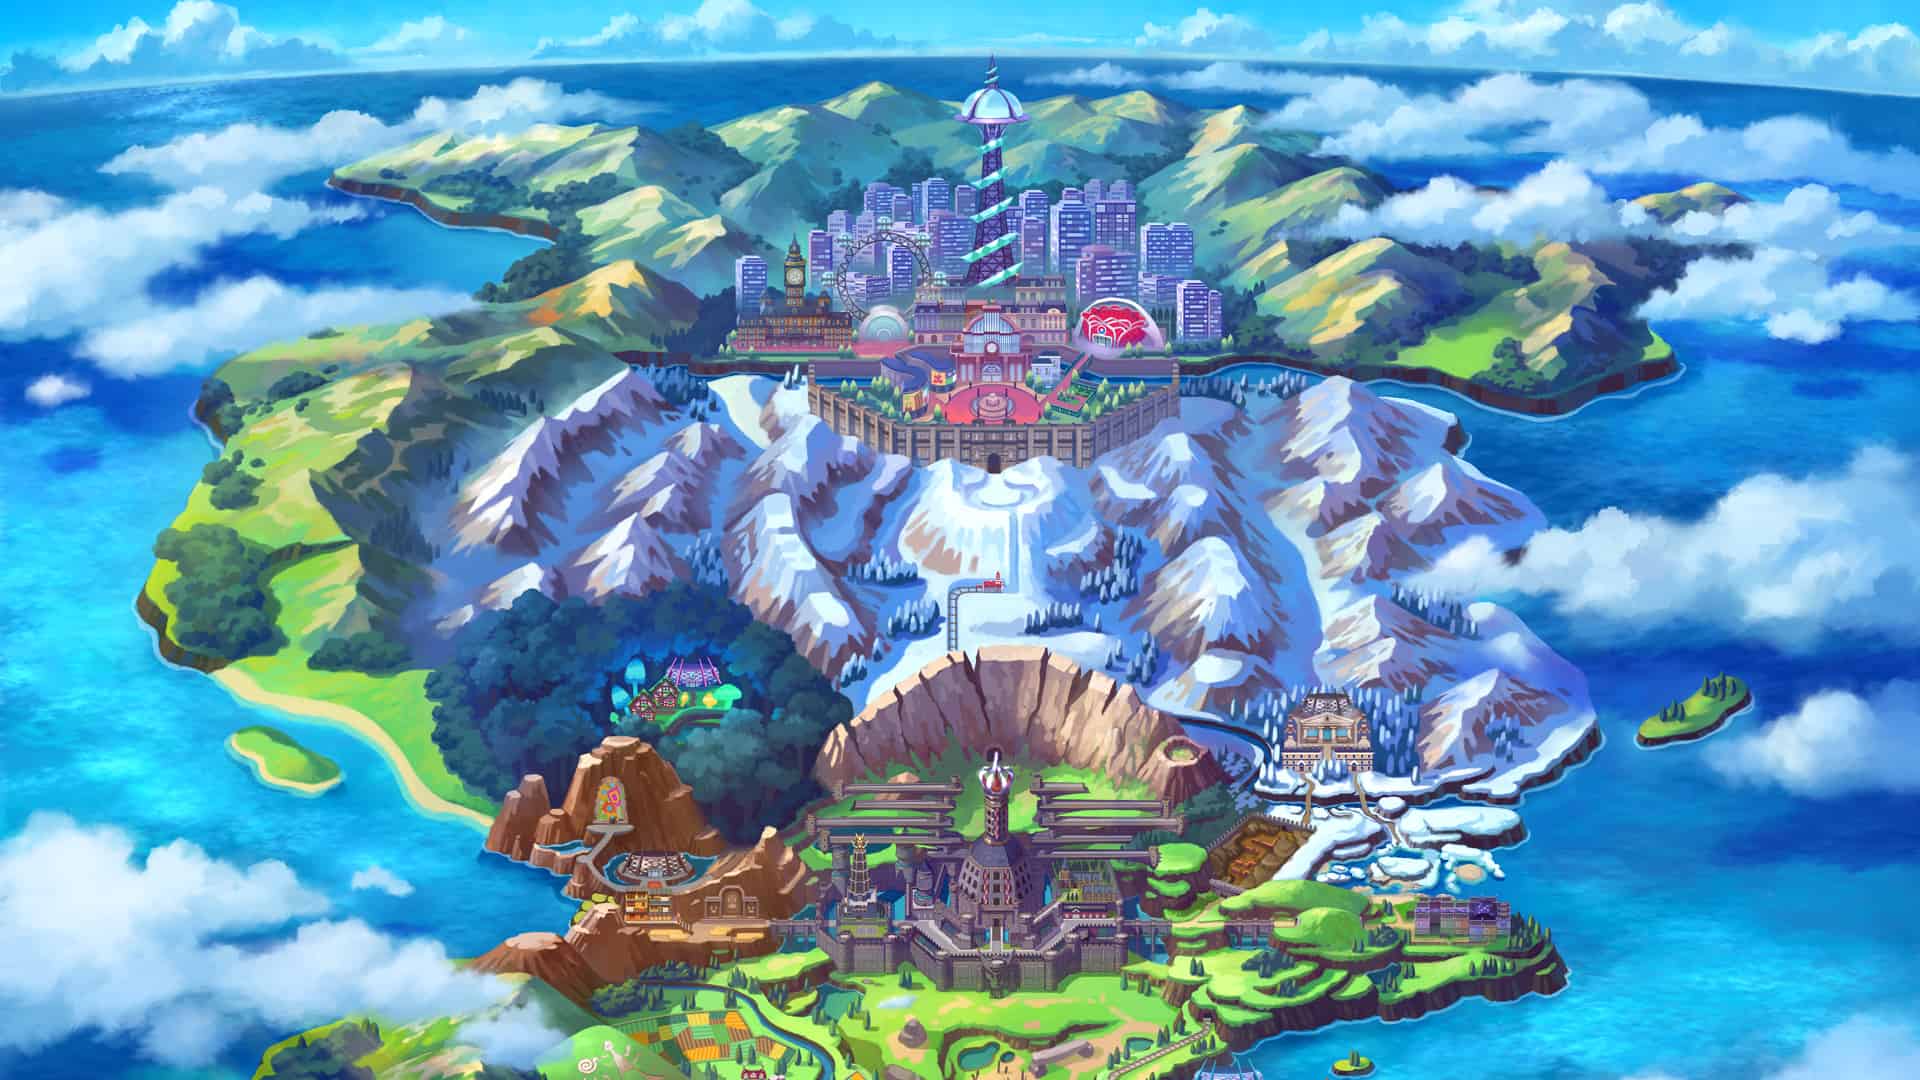 A partial map of the Galar region from Pokemon Sword and Shield.